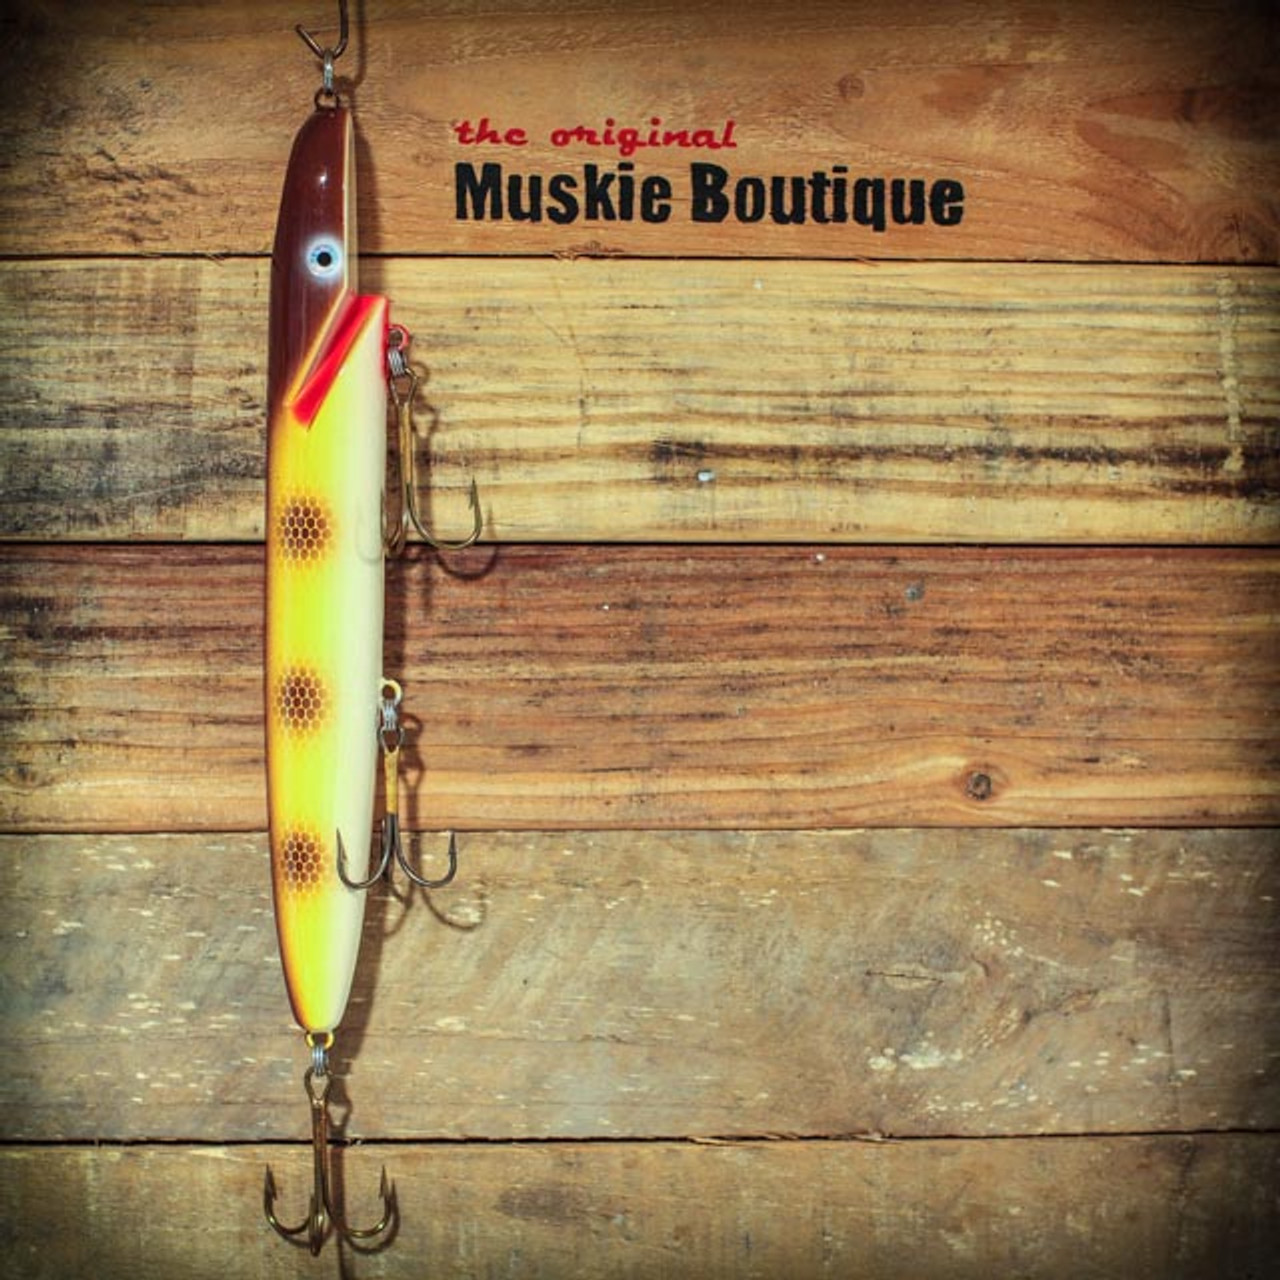 Sledge Hammer - 11 Sledge (Weighted) - Muskie Boutique